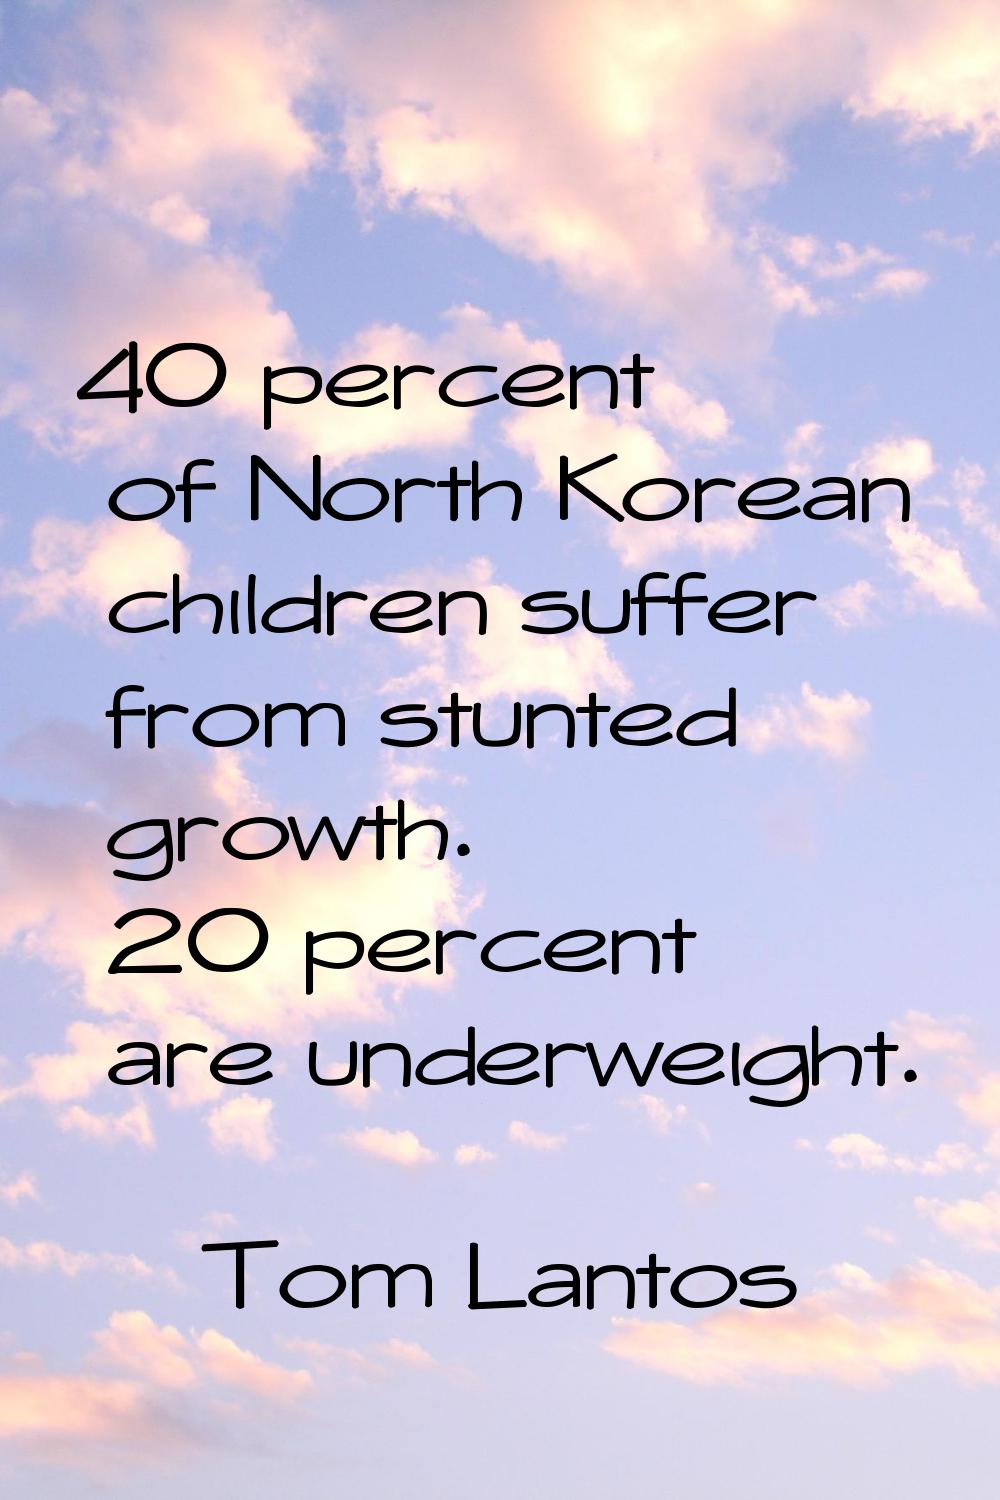 40 percent of North Korean children suffer from stunted growth. 20 percent are underweight.